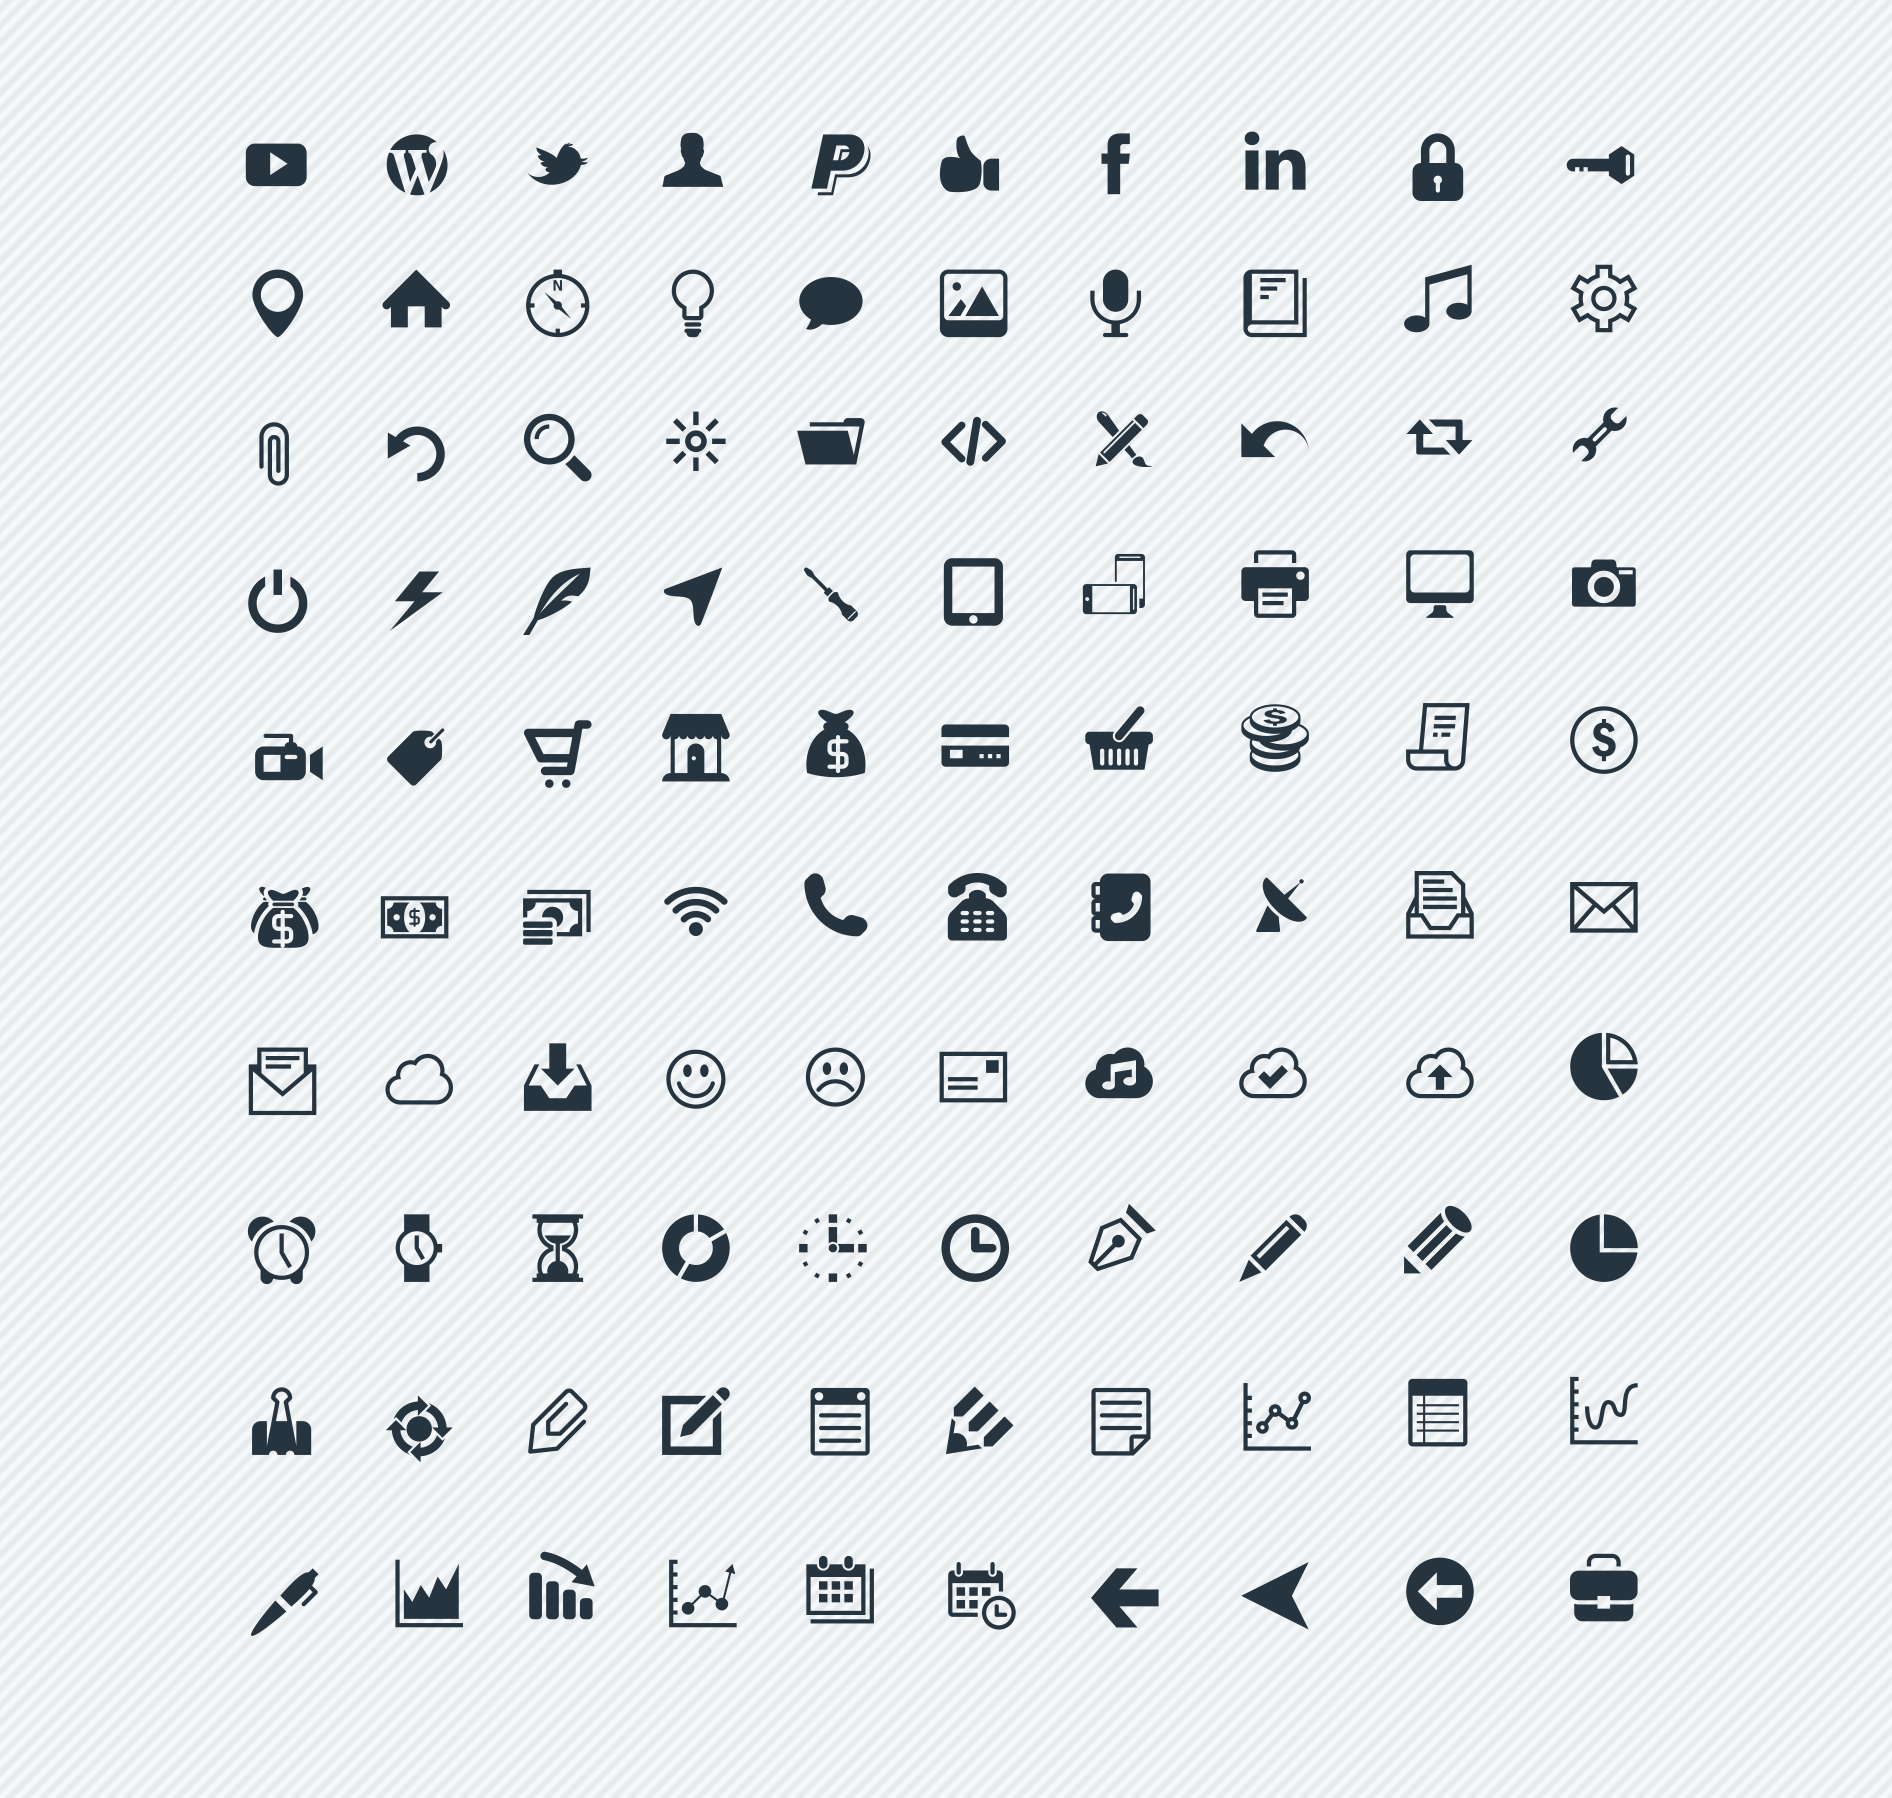 450 Kind universal icons vector set - Other Icons, Vector Icons 